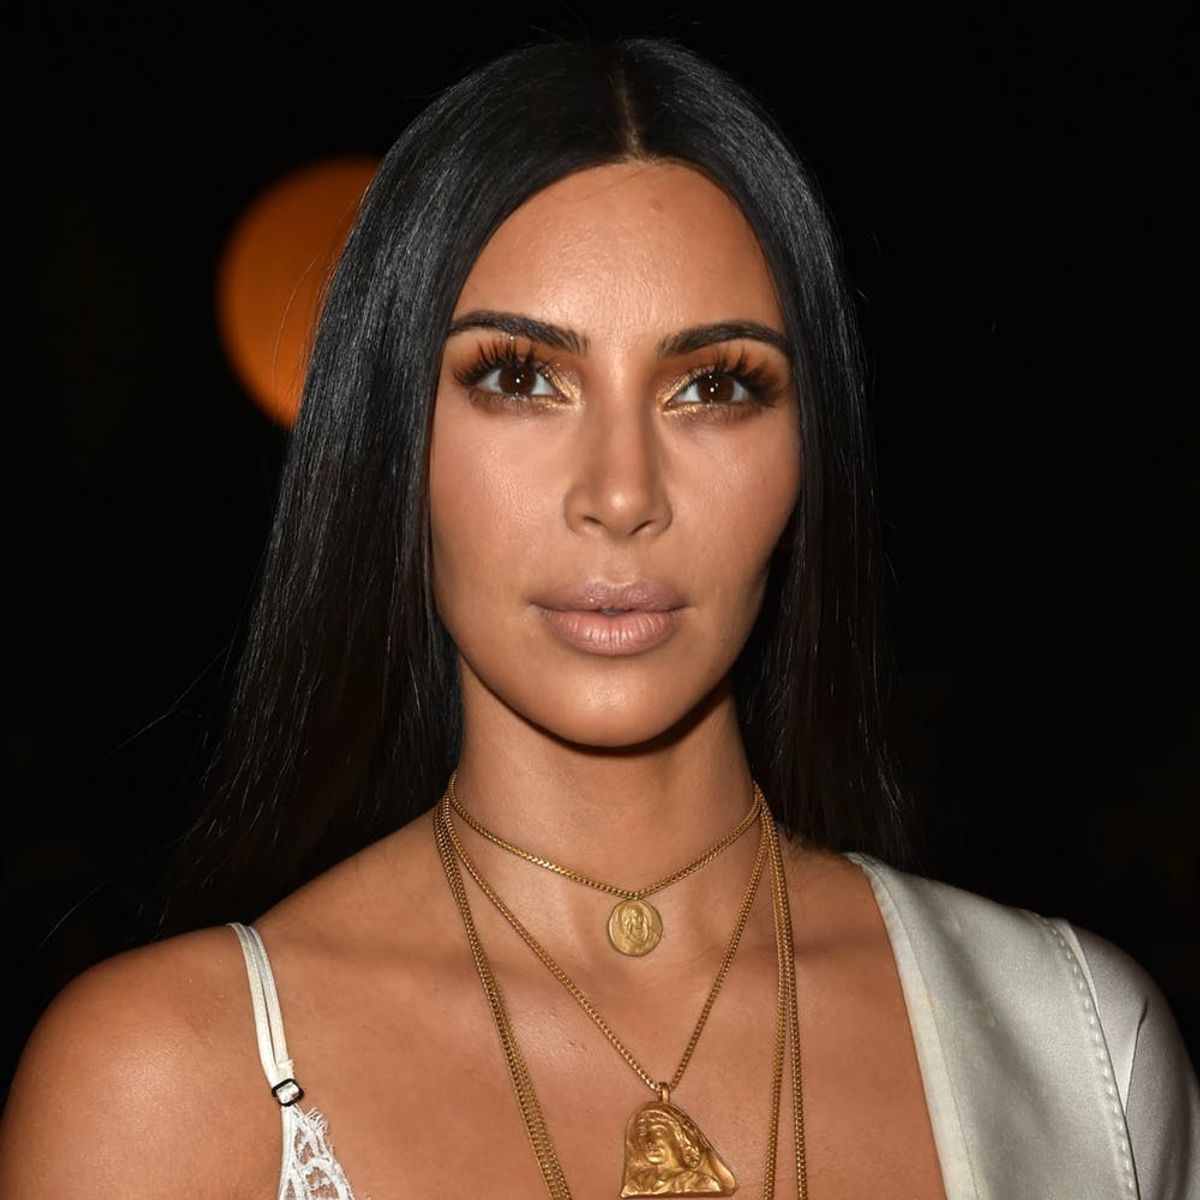 The Hotel Concierge Involved in Kim K.’s Robbery Has a Heartfelt Message for Her